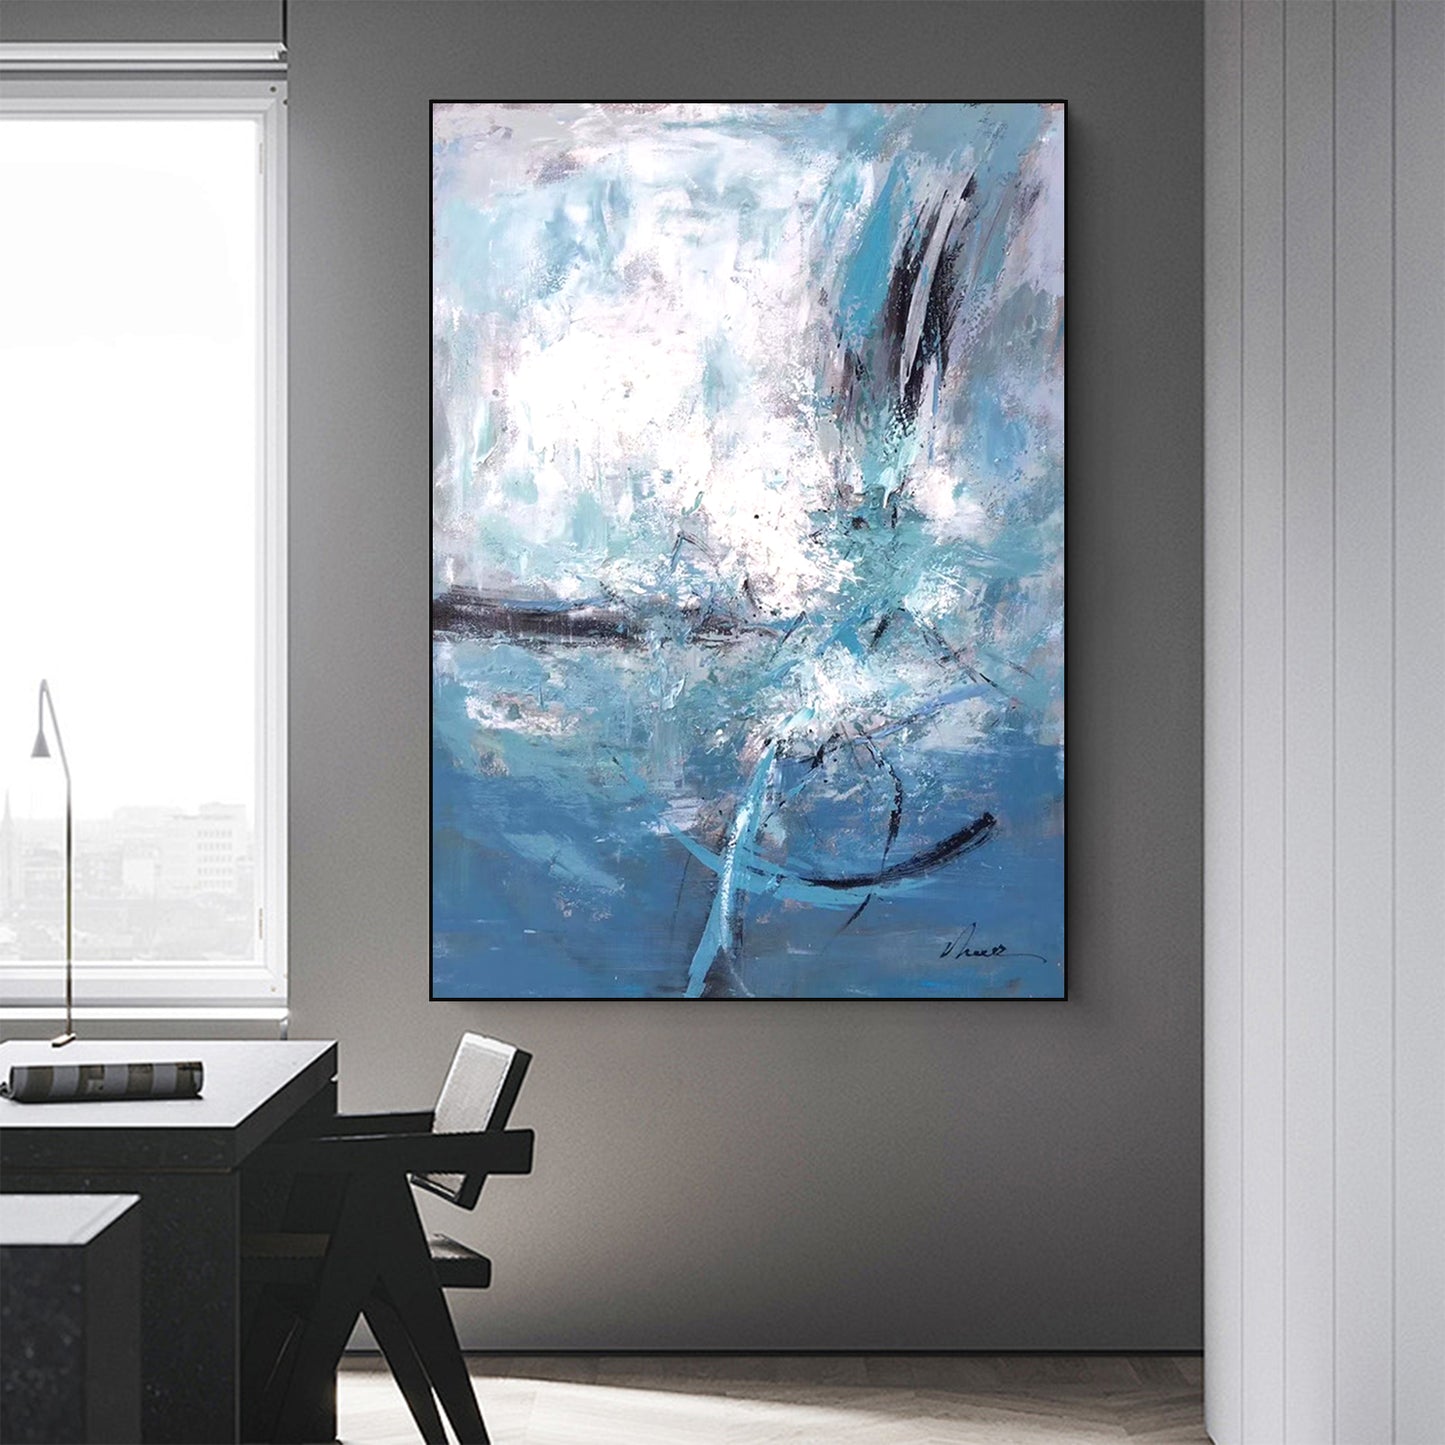 ABSTRACT PAINTING, BLUE PLANET, HAND-PAINTED CANVAS